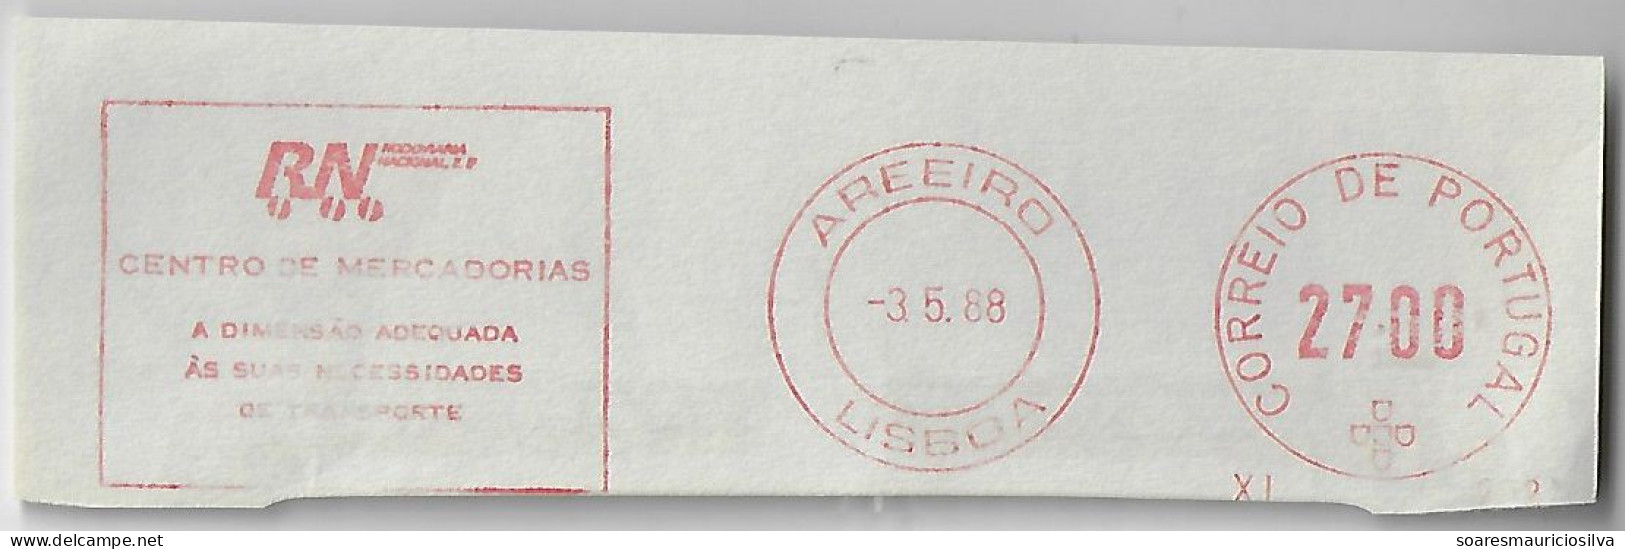 Portugal 1988 Cover Fragment Meter Stamp Frama Slogan National Road Co. From Lisbon Areeiro Agency Transport Bus - Busses